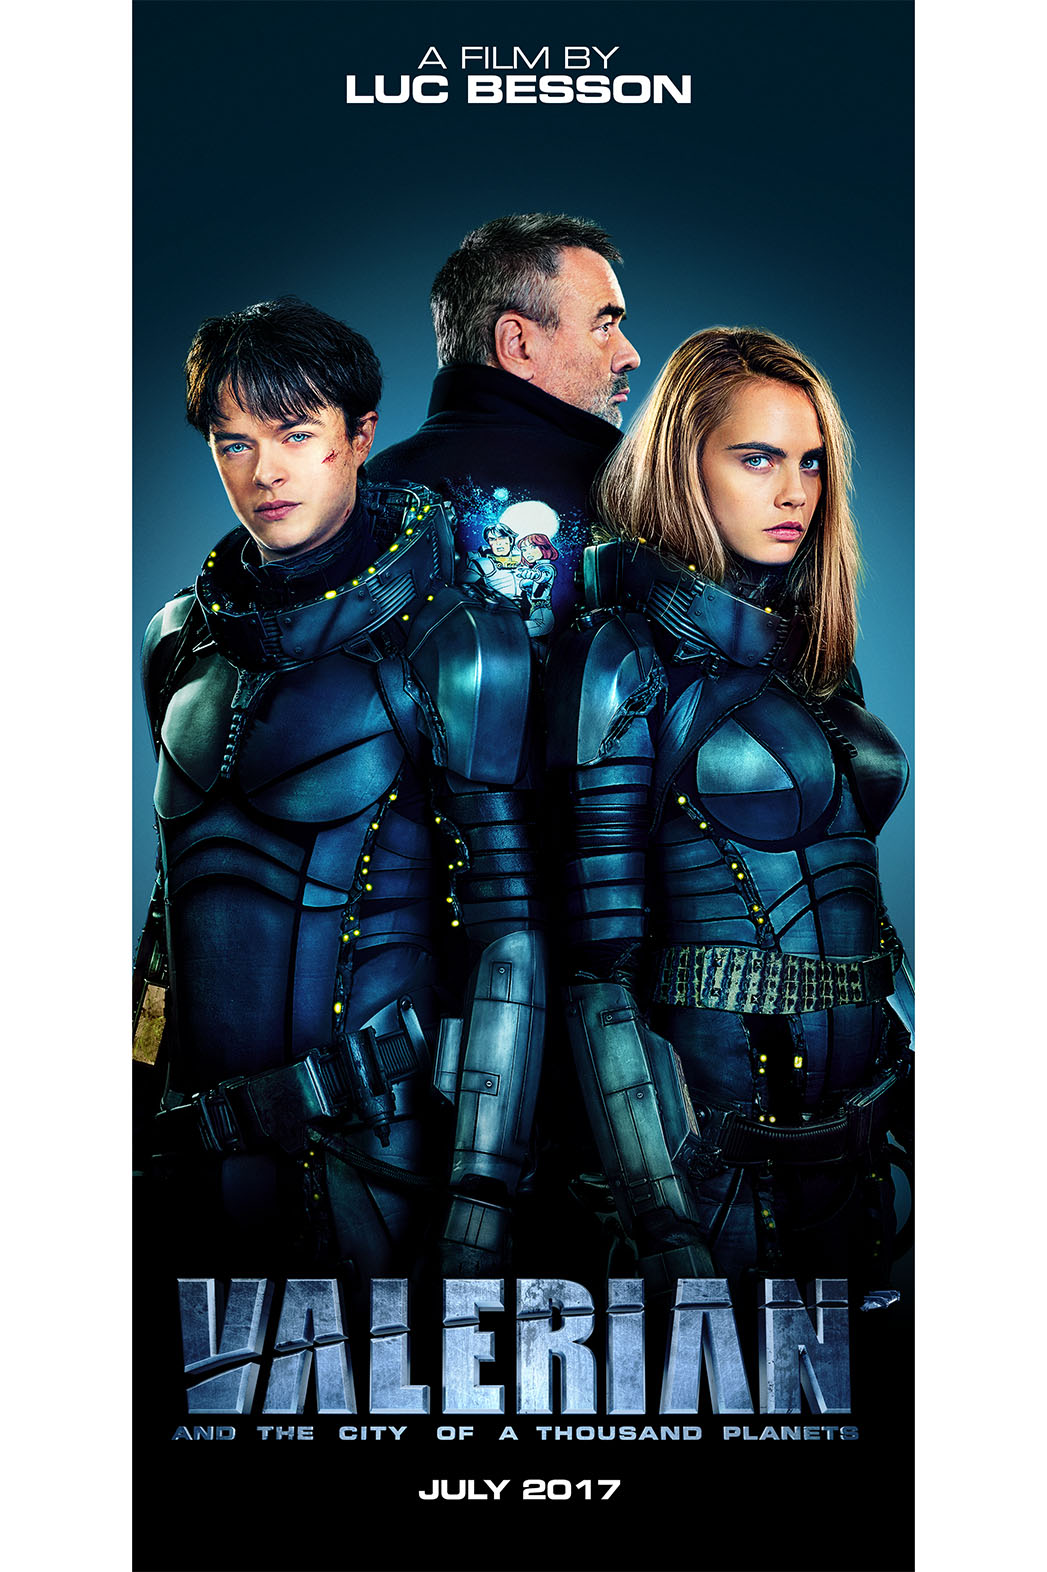 Valerian And The City Of A Thousand Planets Backgrounds, Compatible - PC, Mobile, Gadgets| 1047x1572 px